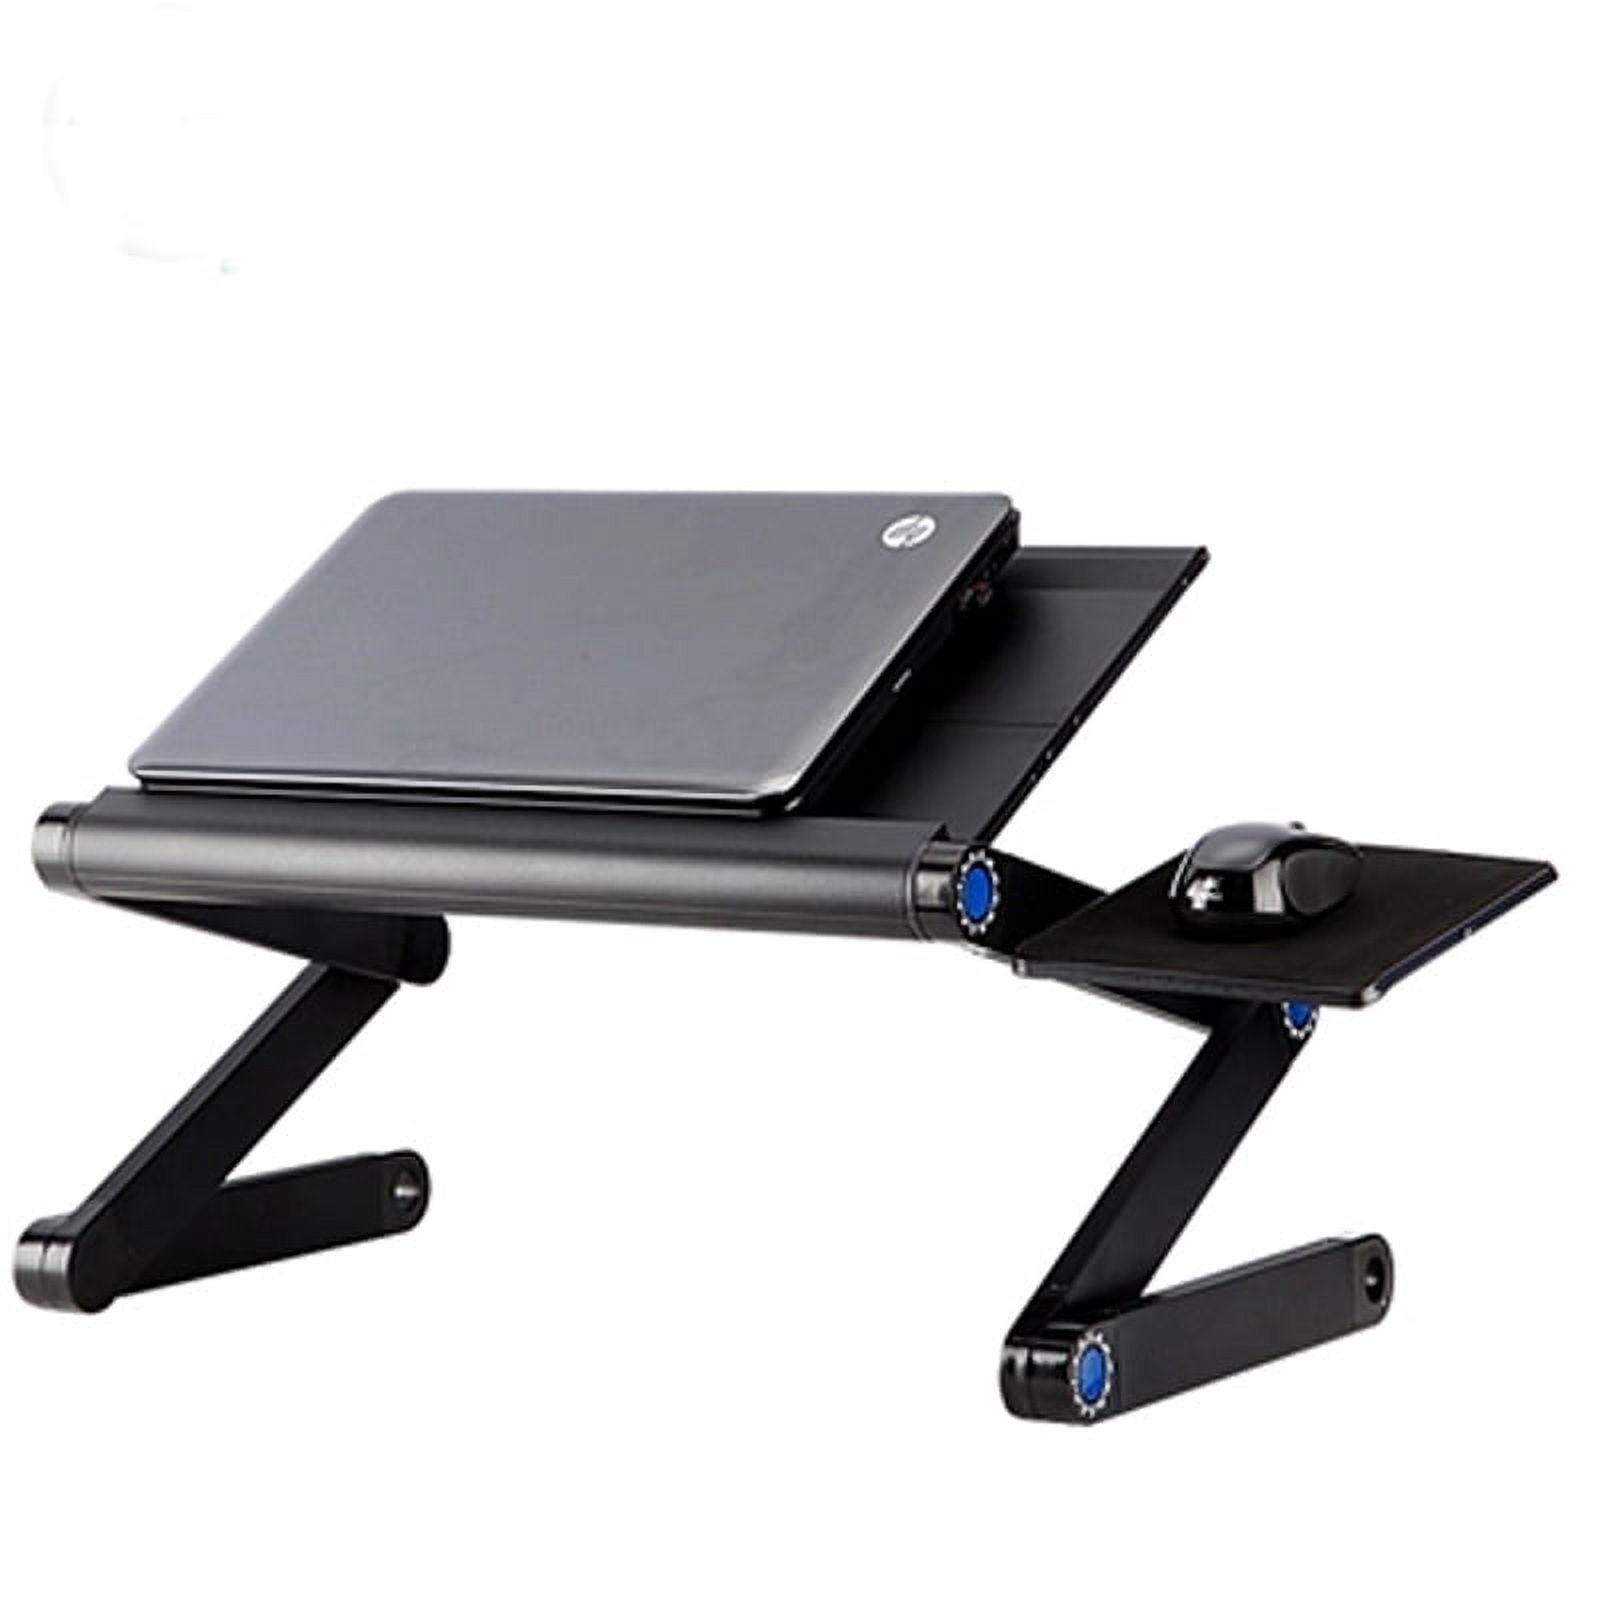 Intbuying Adjustable Aluminum Laptop Desk Portable Stand Vented Table